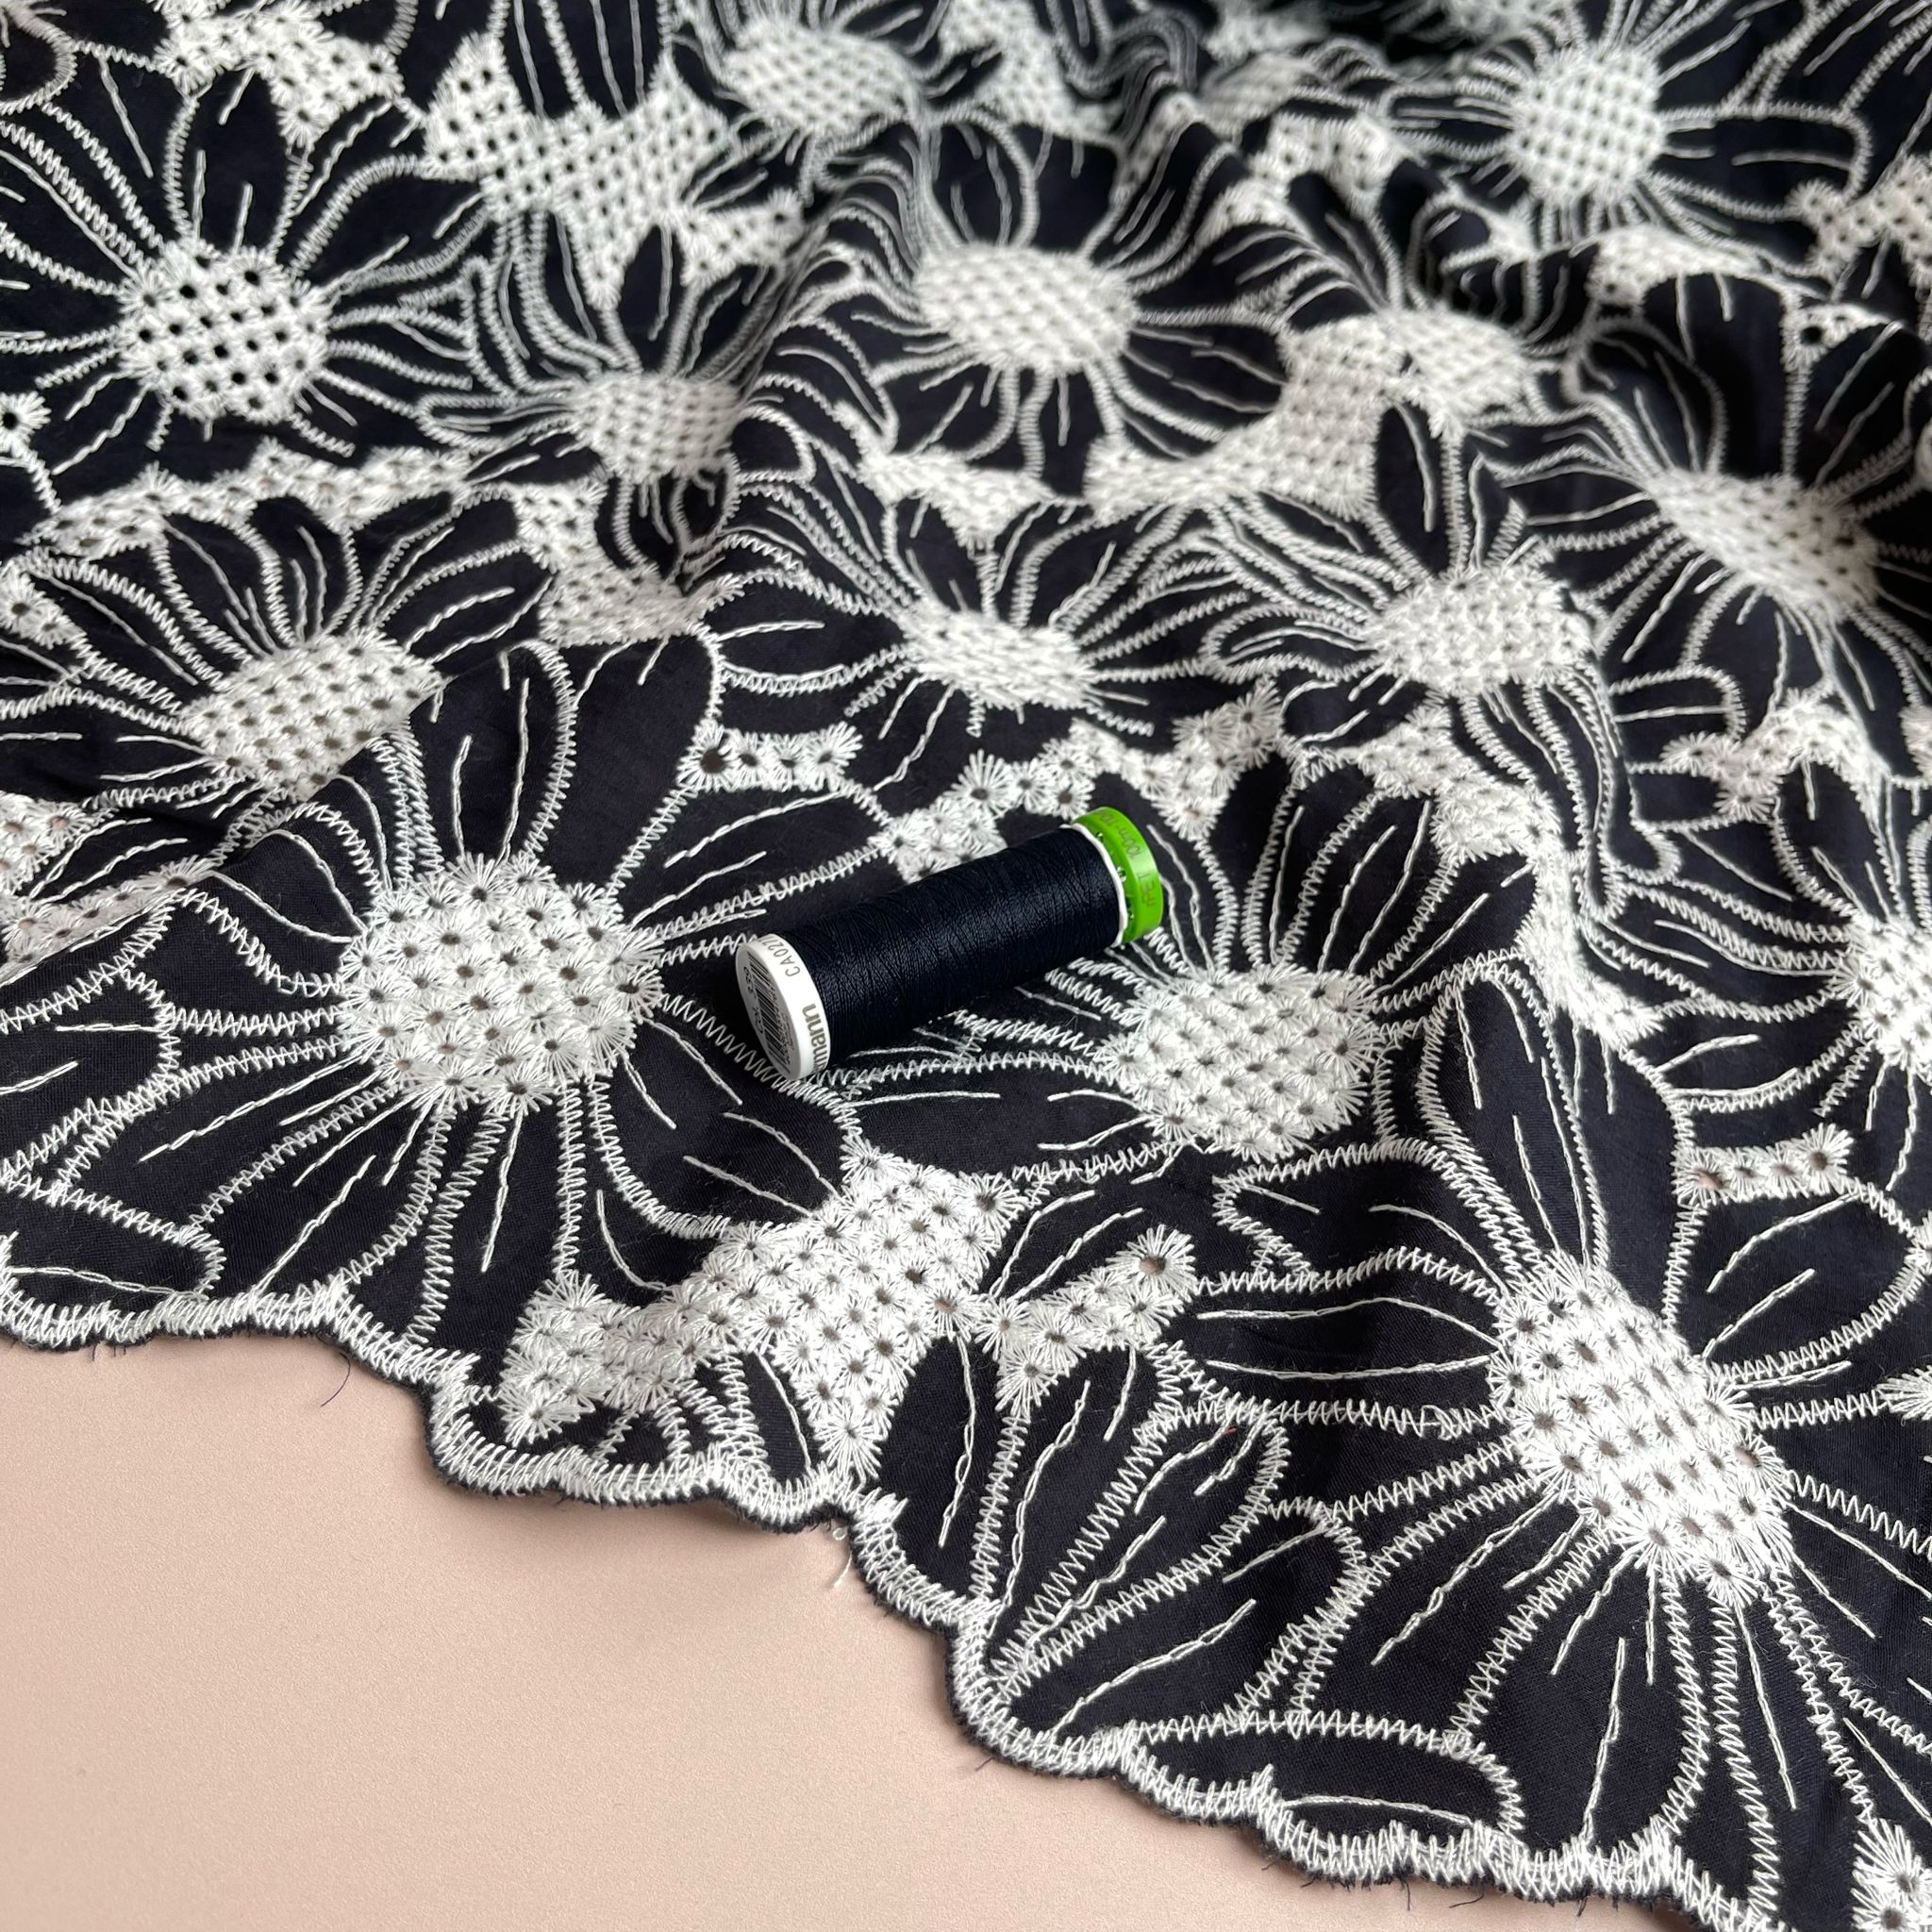 Scalloped Flowers Embroidered Cotton Fabric in Dark Navy